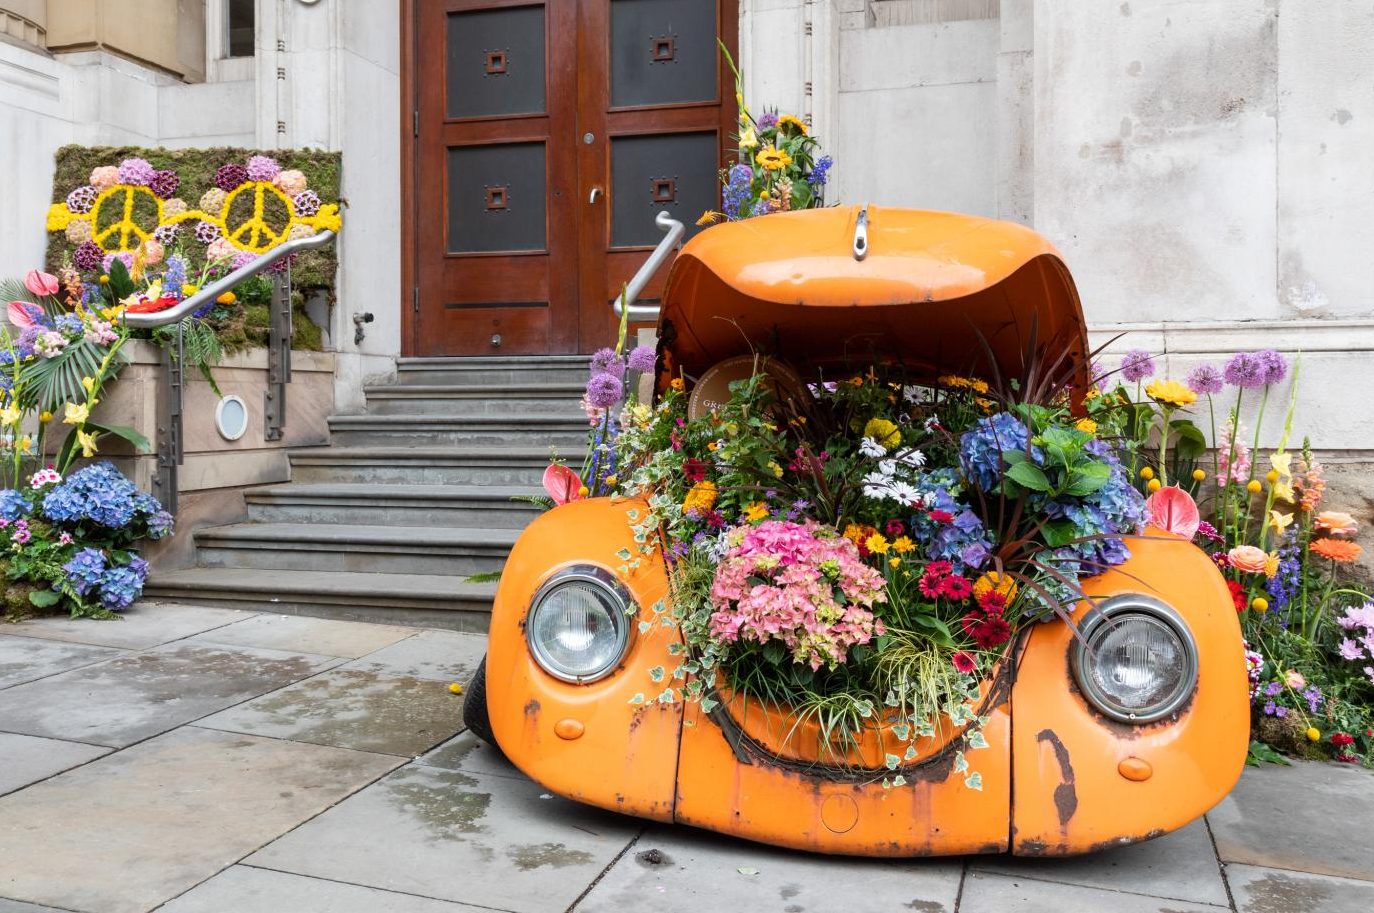 The streets of Manchester city centre will be filled with flower sculptures this summer, The Manc